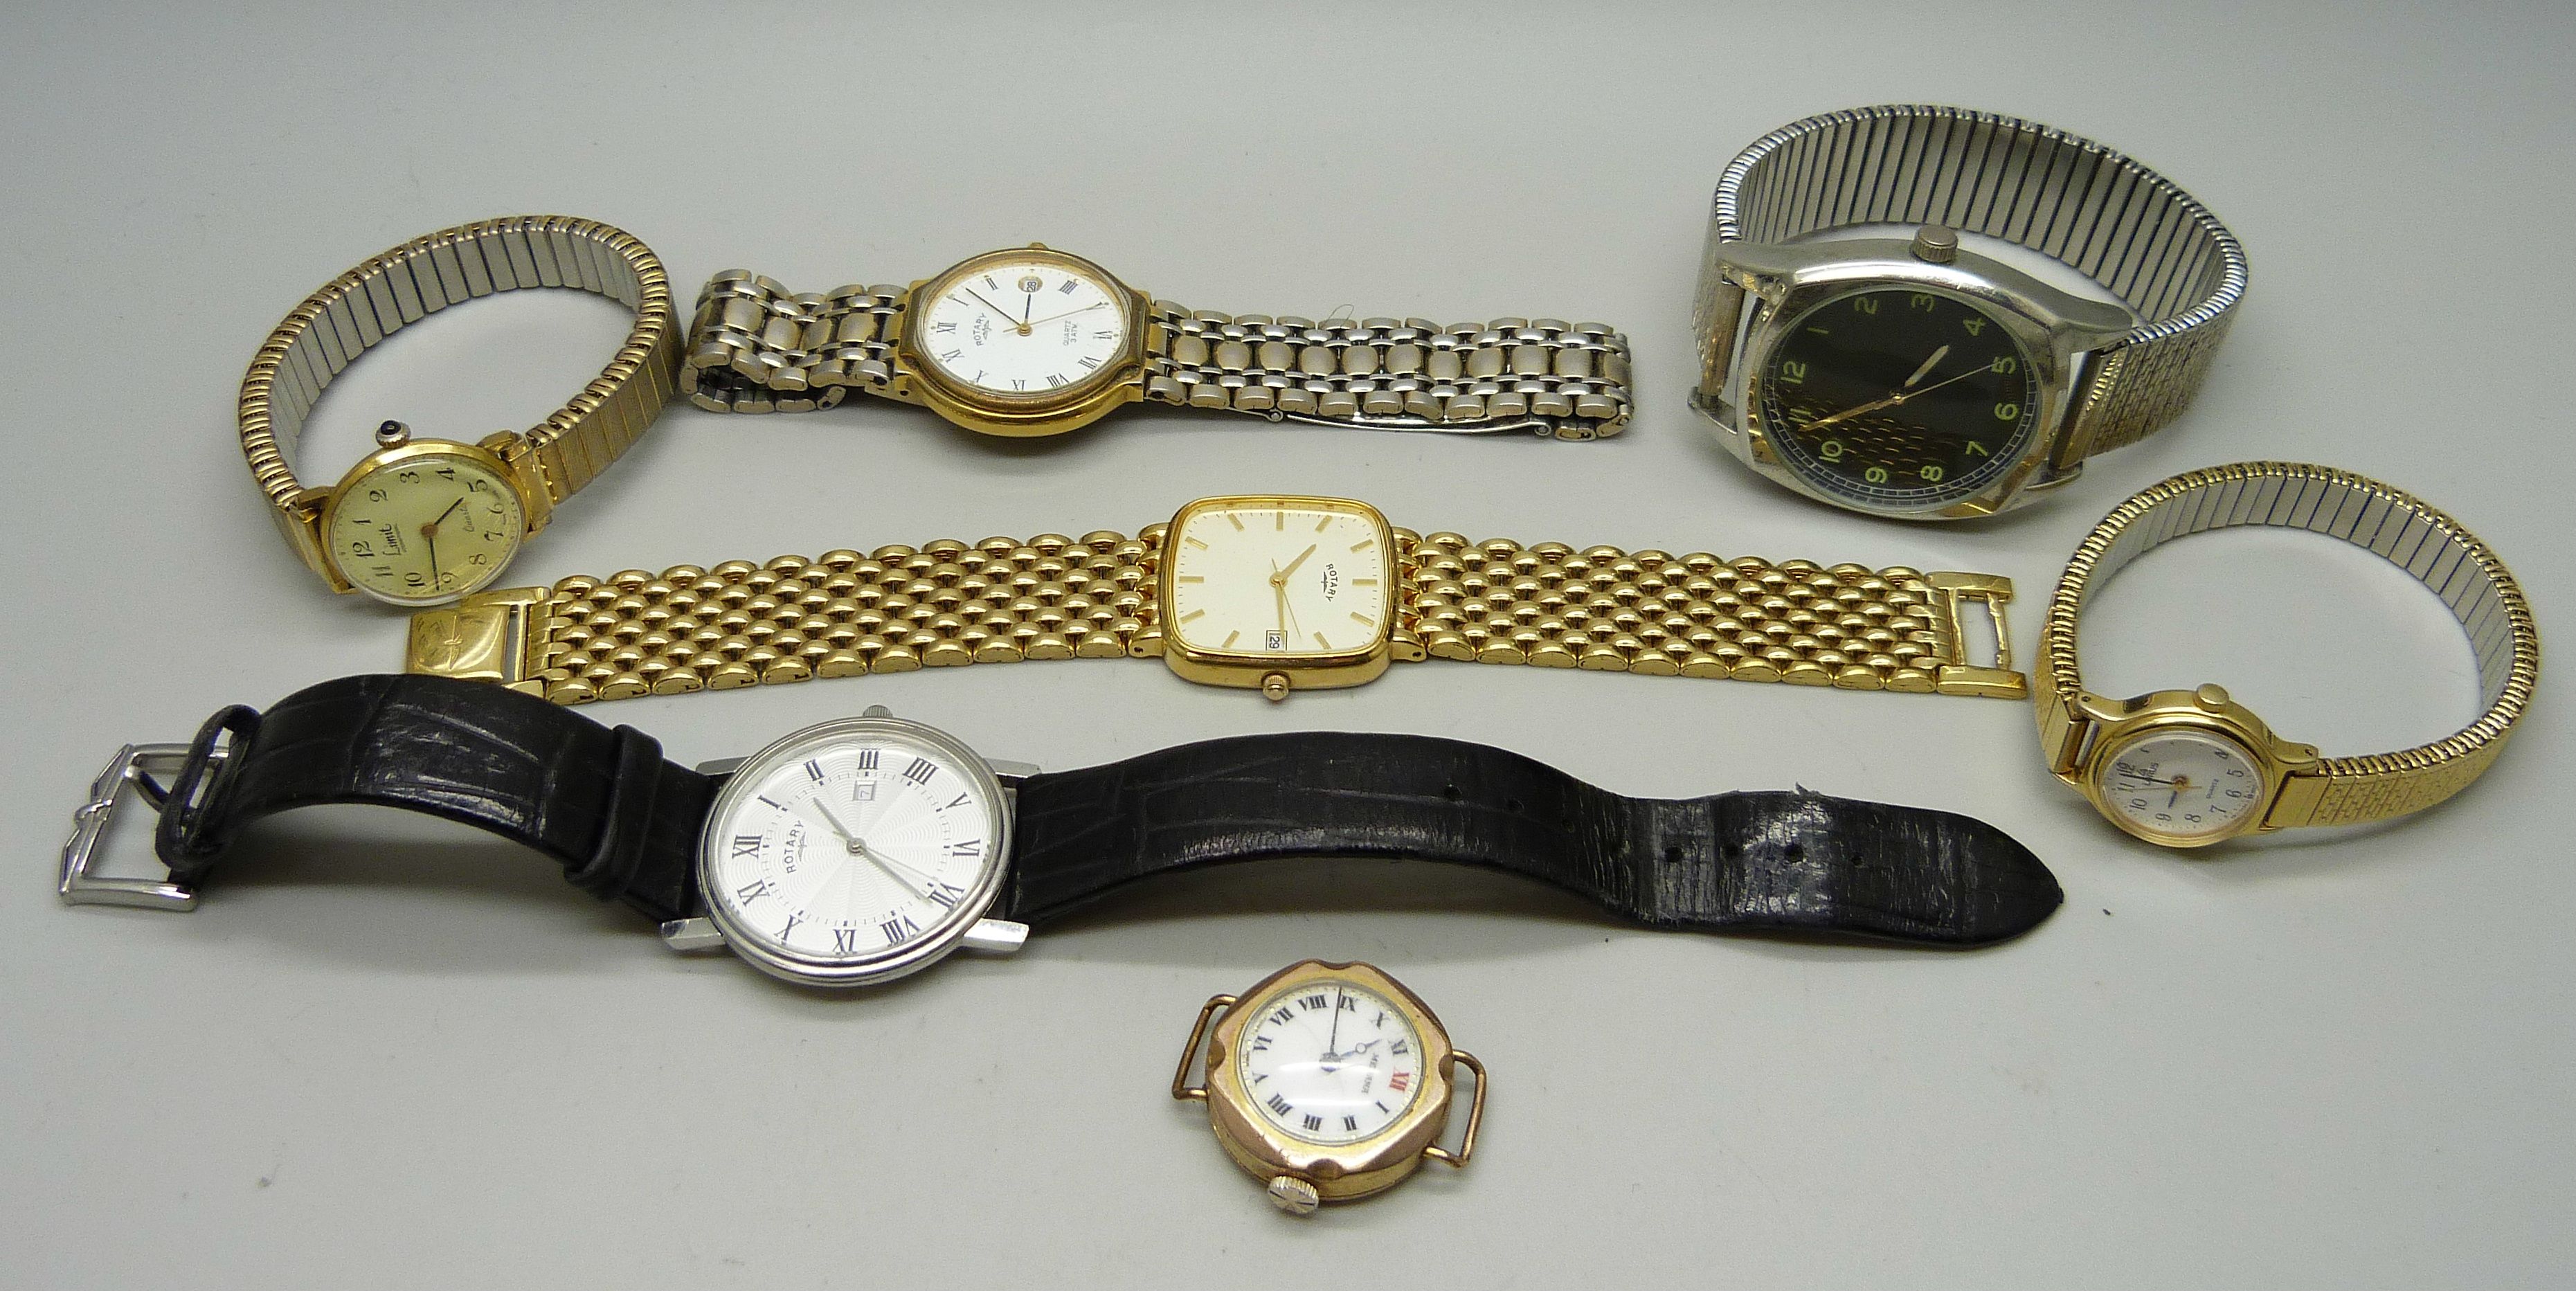 A collection of lady's and gentleman's wristwatches including Limit and Rotary